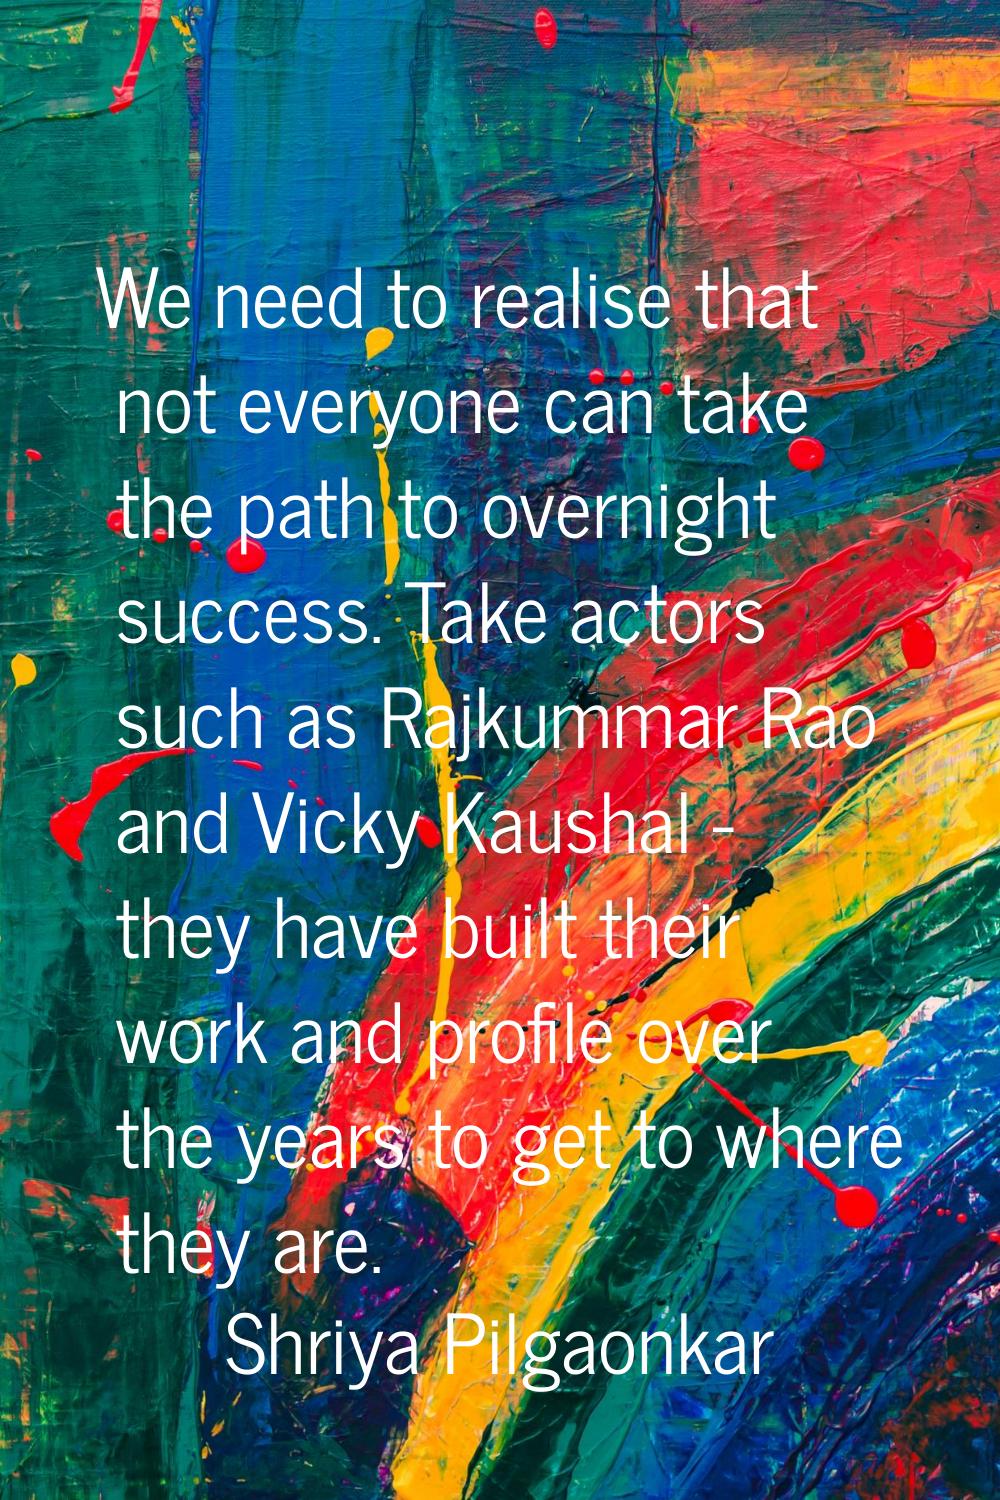 We need to realise that not everyone can take the path to overnight success. Take actors such as Ra